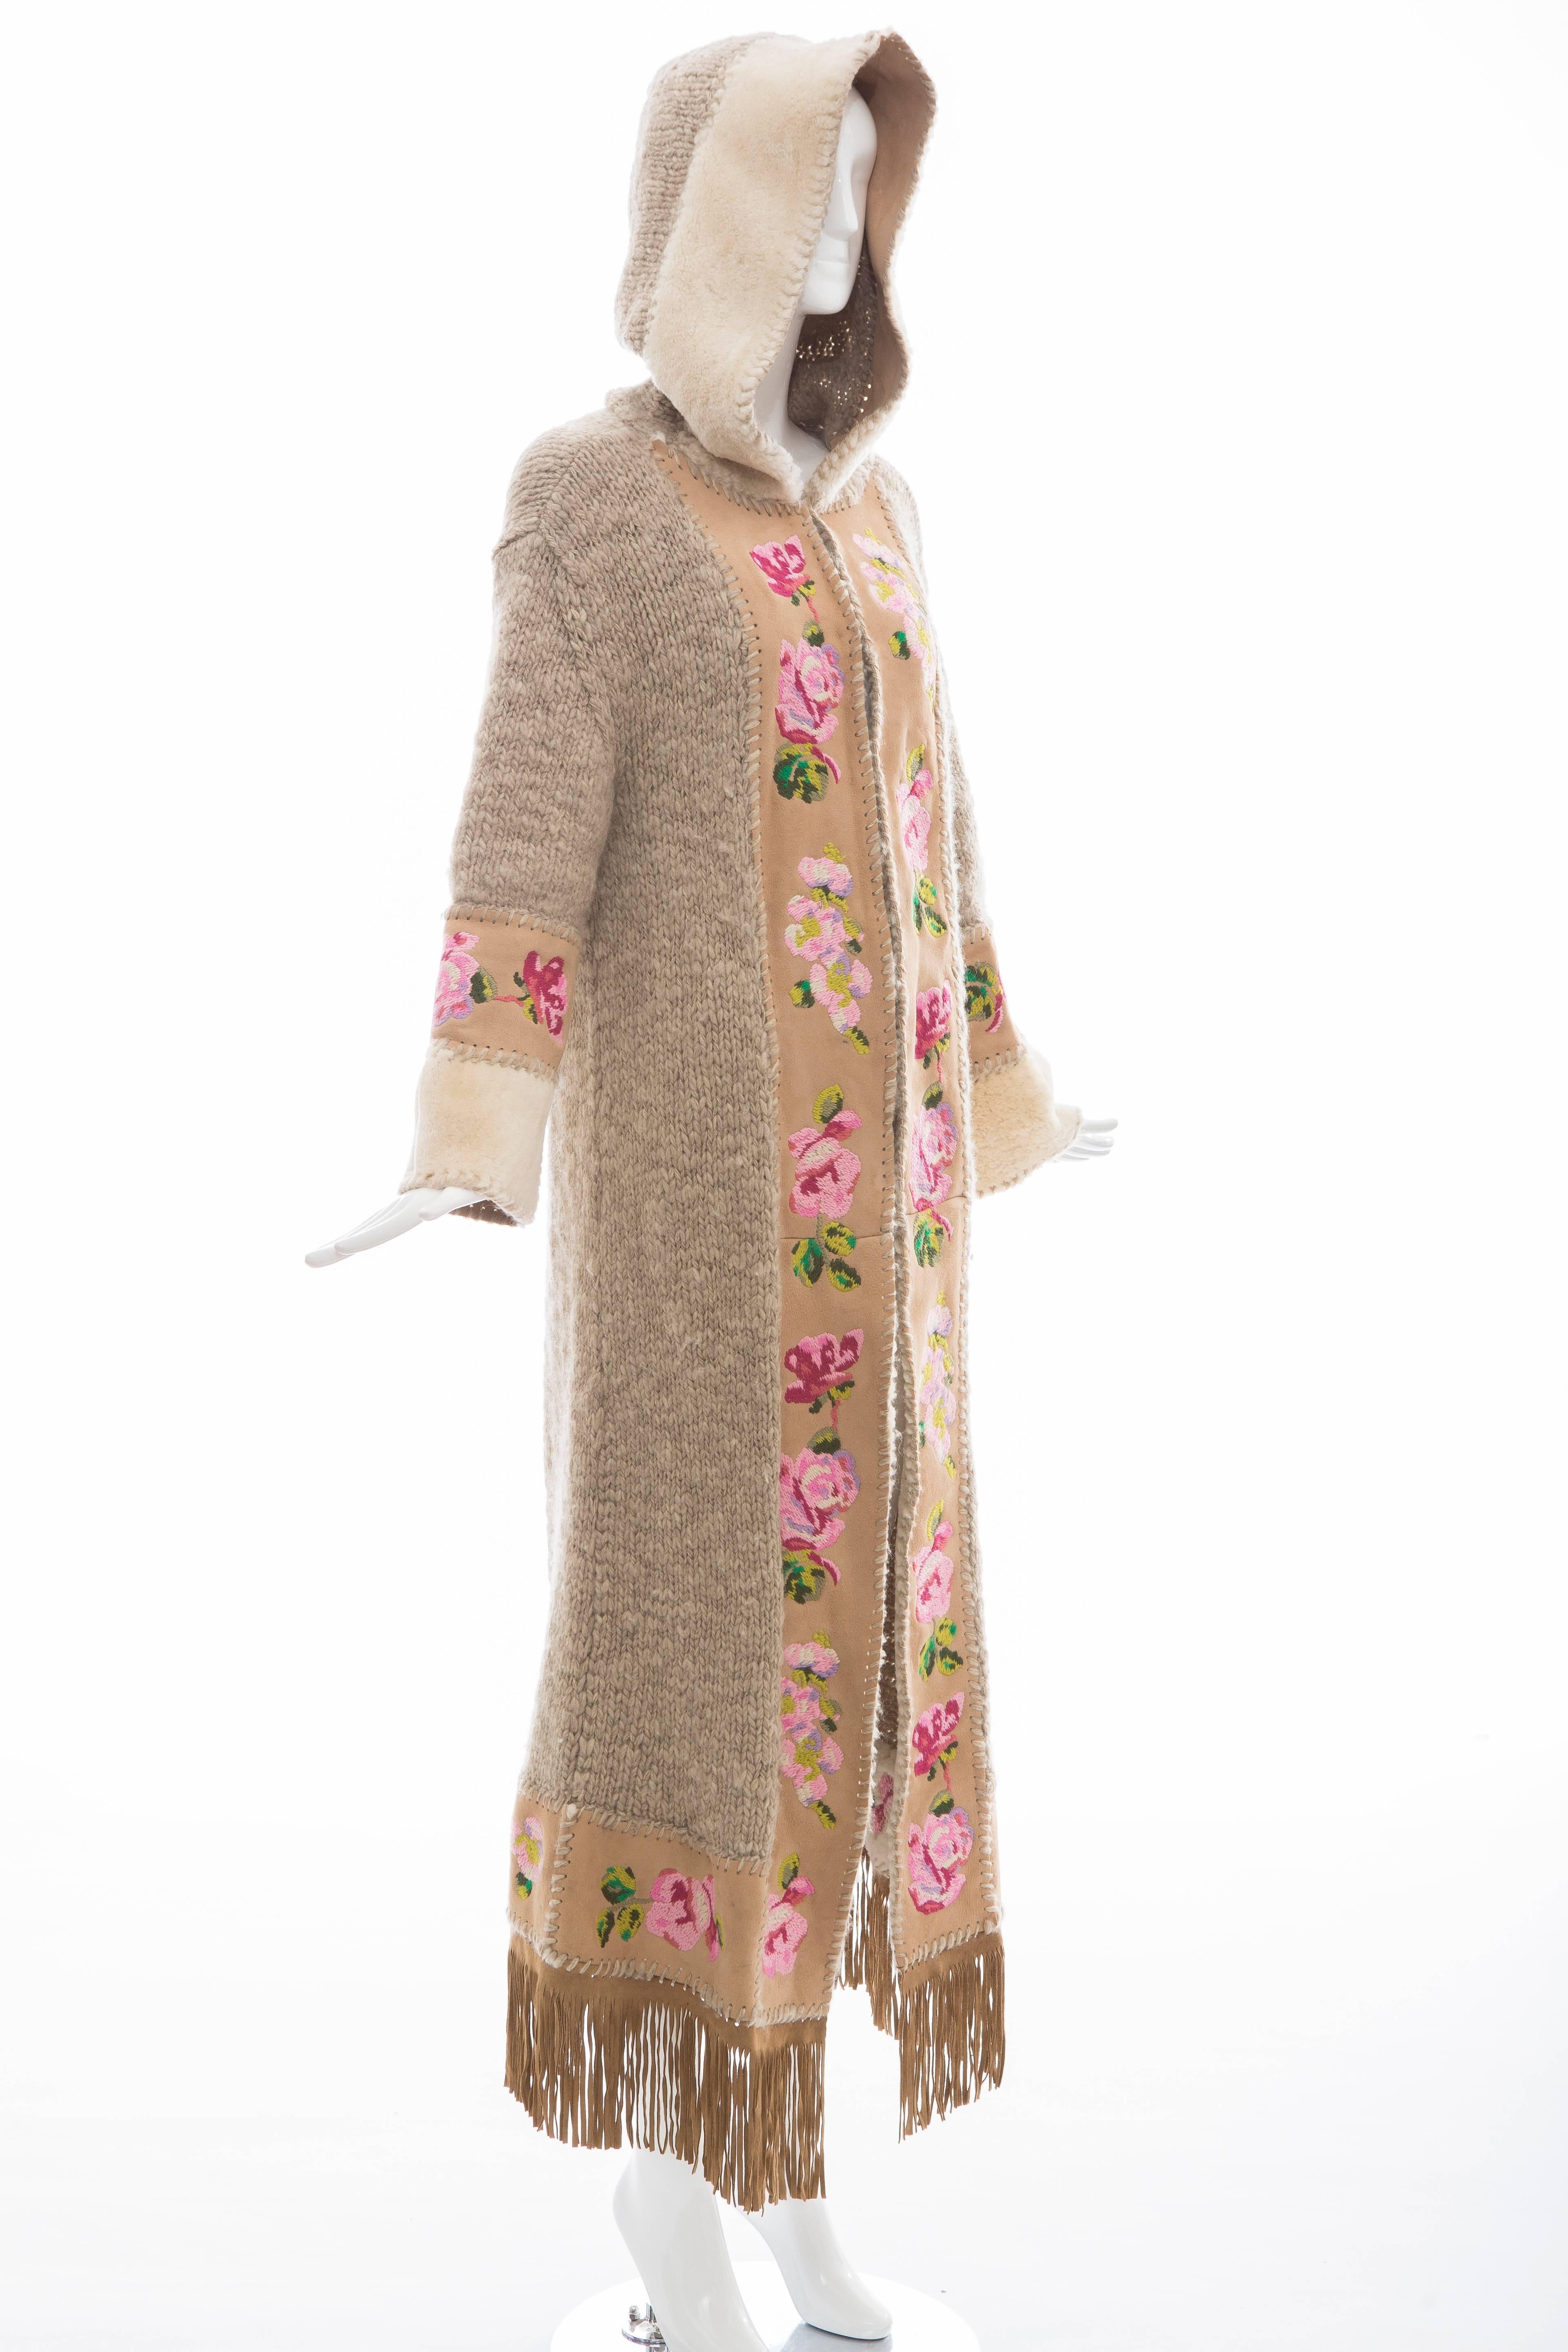 John Galliano for Christian Dior, wool duster with attached hood, suede fringe trim at hem, floral embroidered suede trim and shearling trim throughout and concealed hook closure at front.

90% Wool, 10% Nylon; 100% Leather
Measurements: Bust 40”,